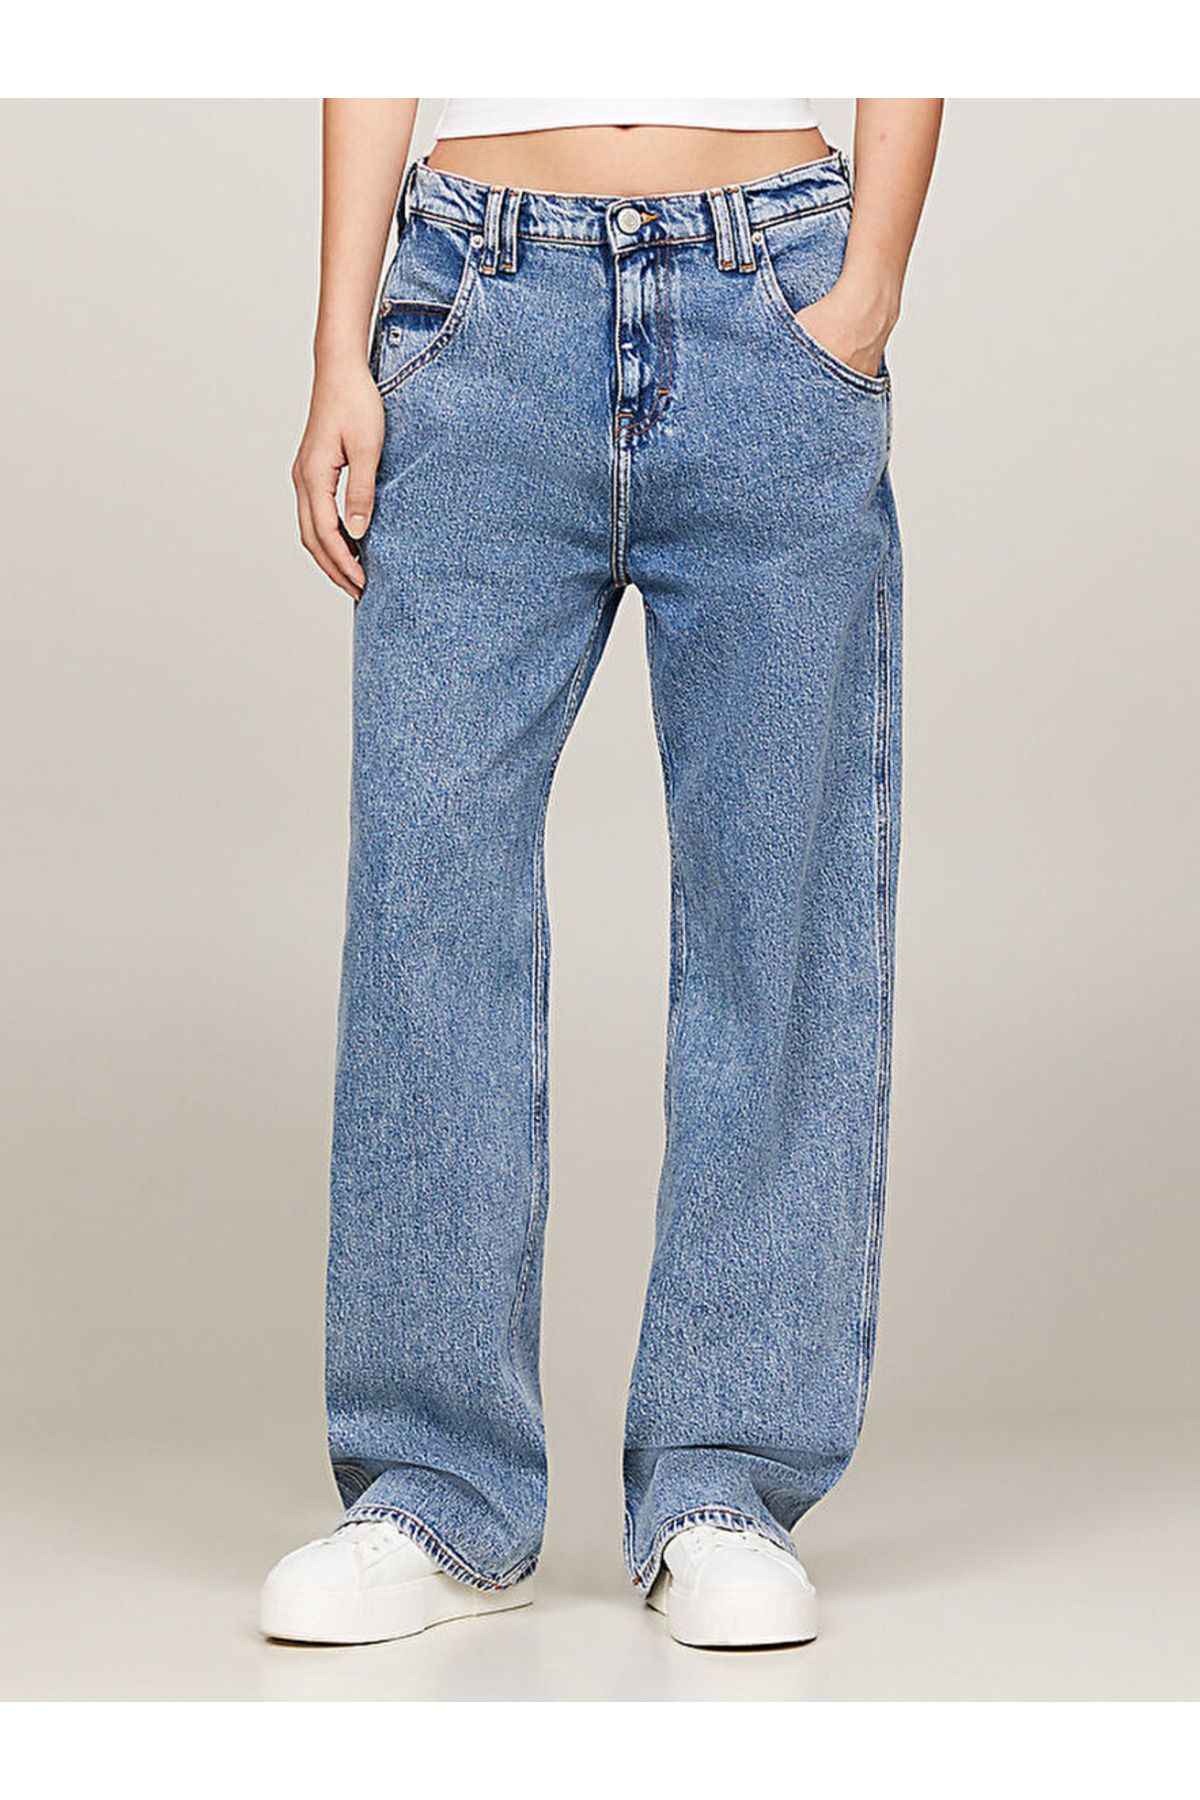 Tommy Hilfiger Daisy Low Rise Baggy Jeans